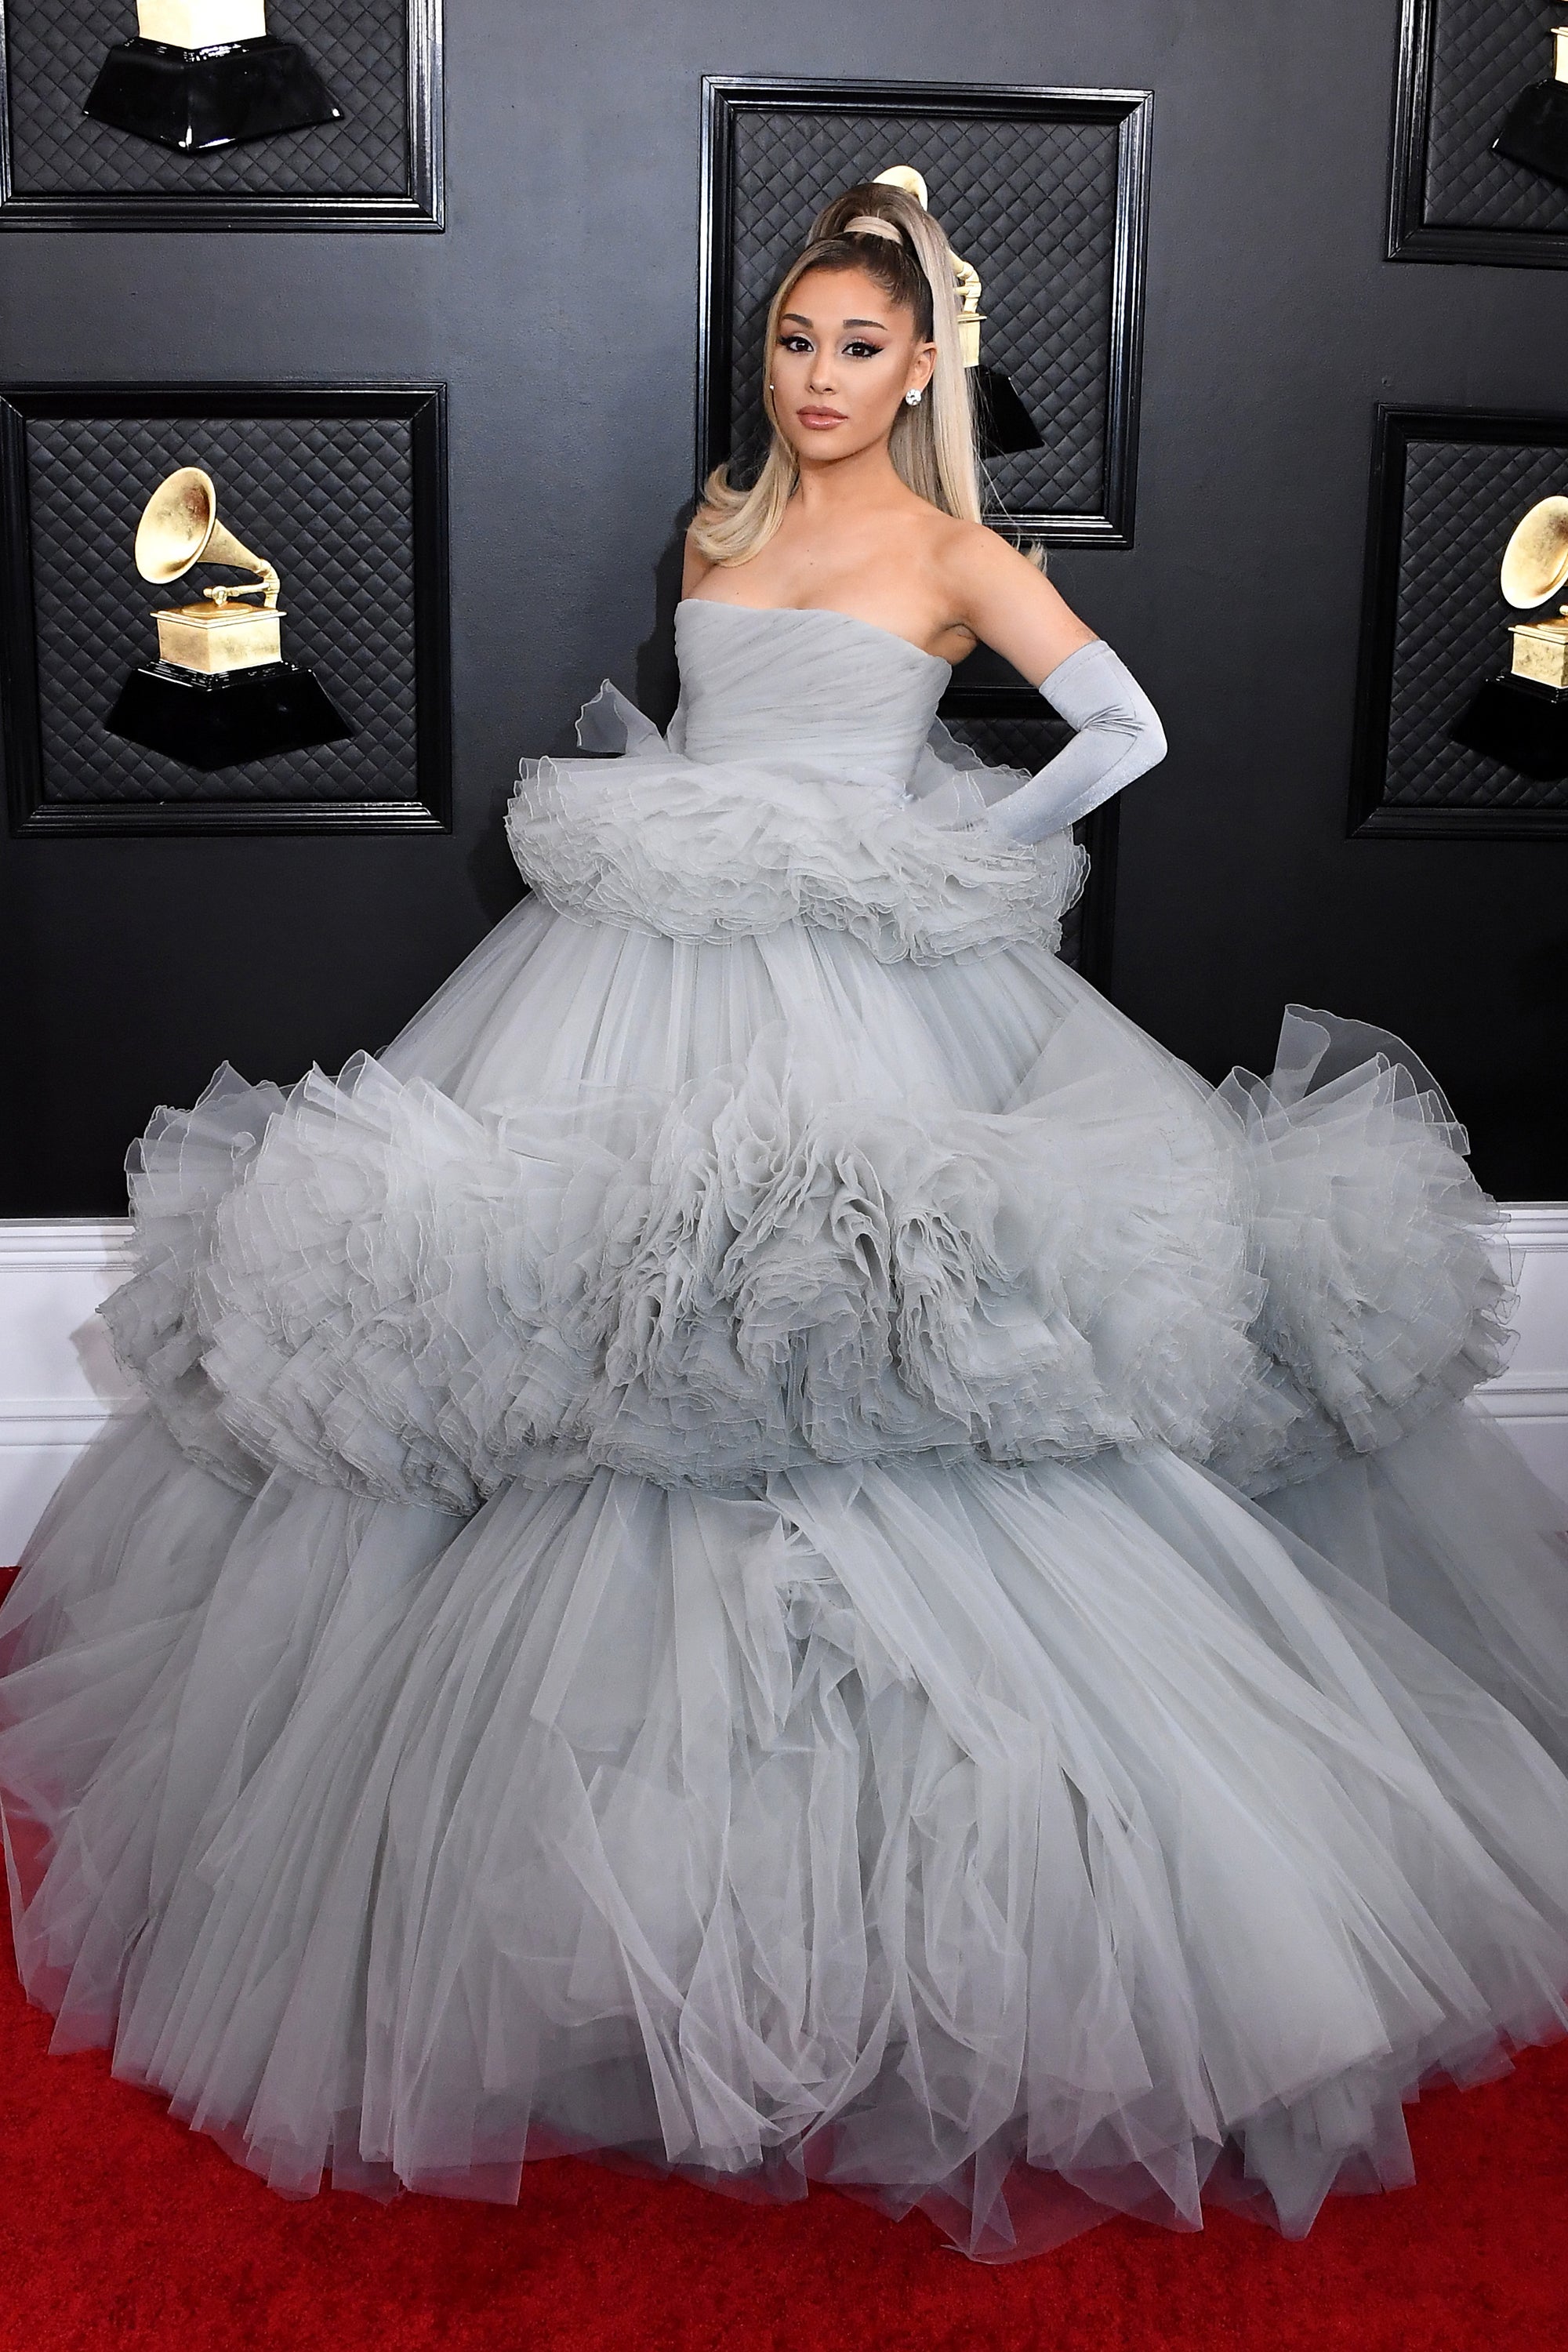 These Are The Best Grammys Looks Of All Time - One Stop Trending News